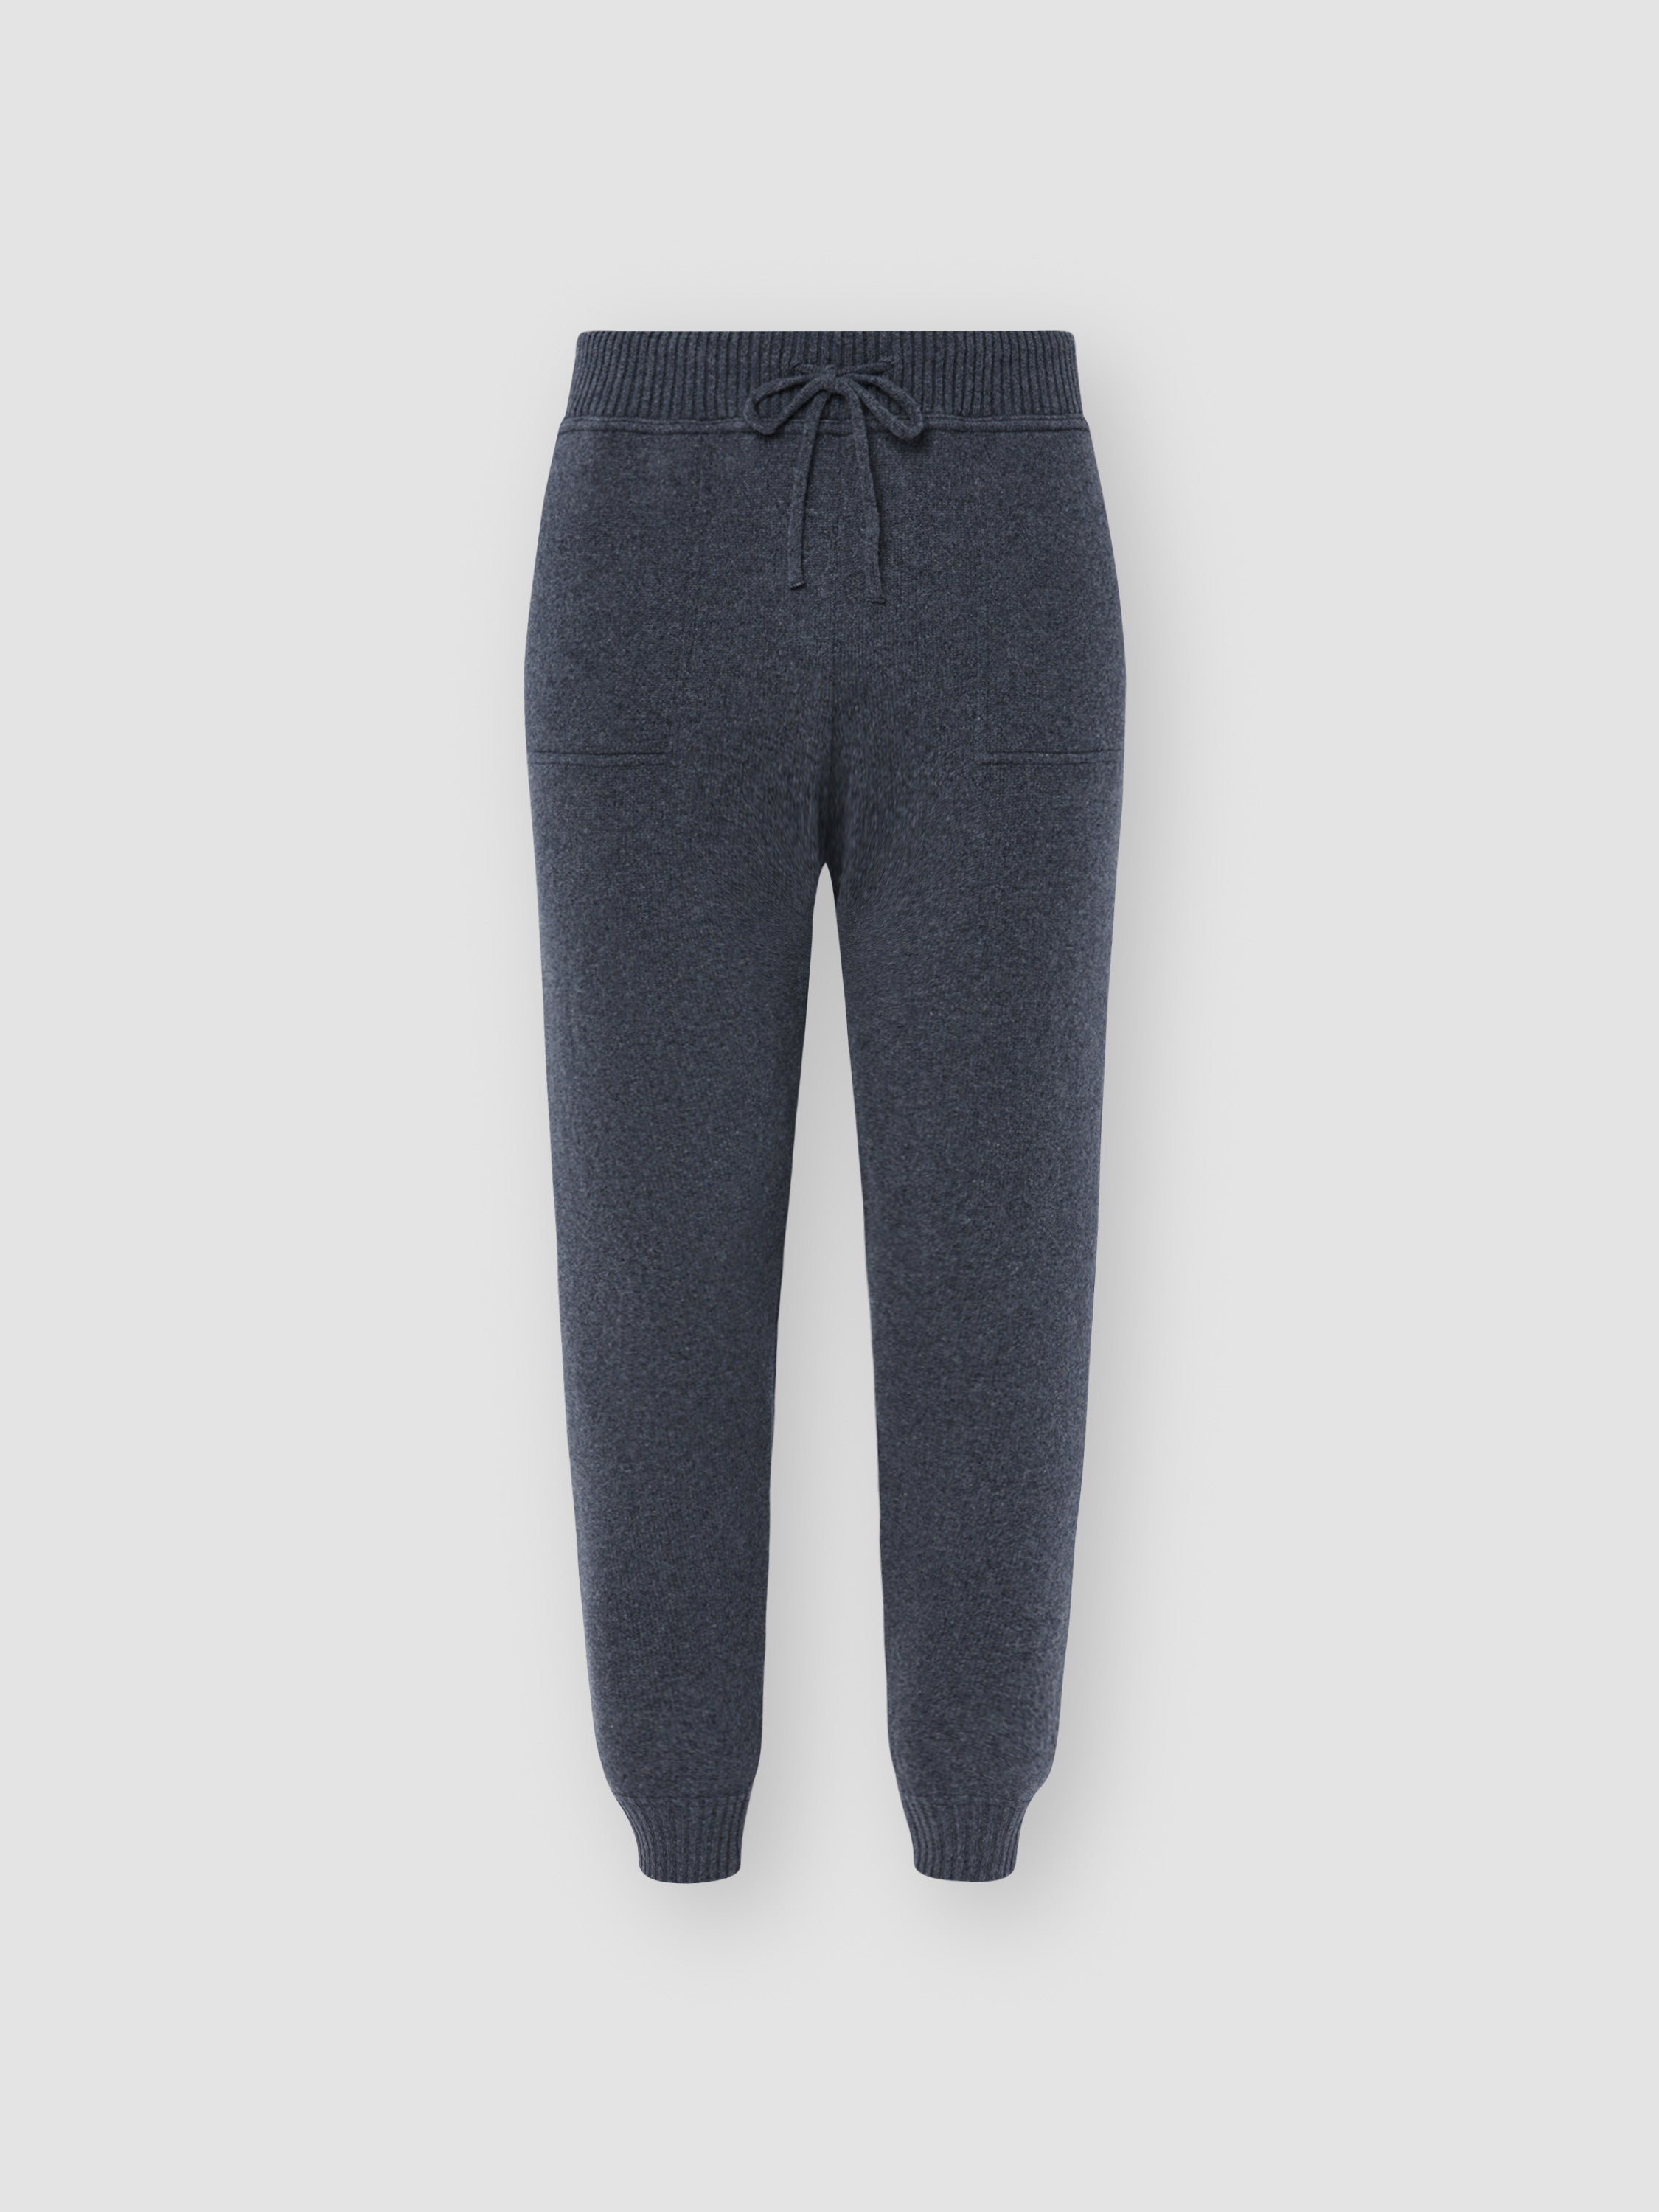 Cashmere Track Pant Grey Product Image